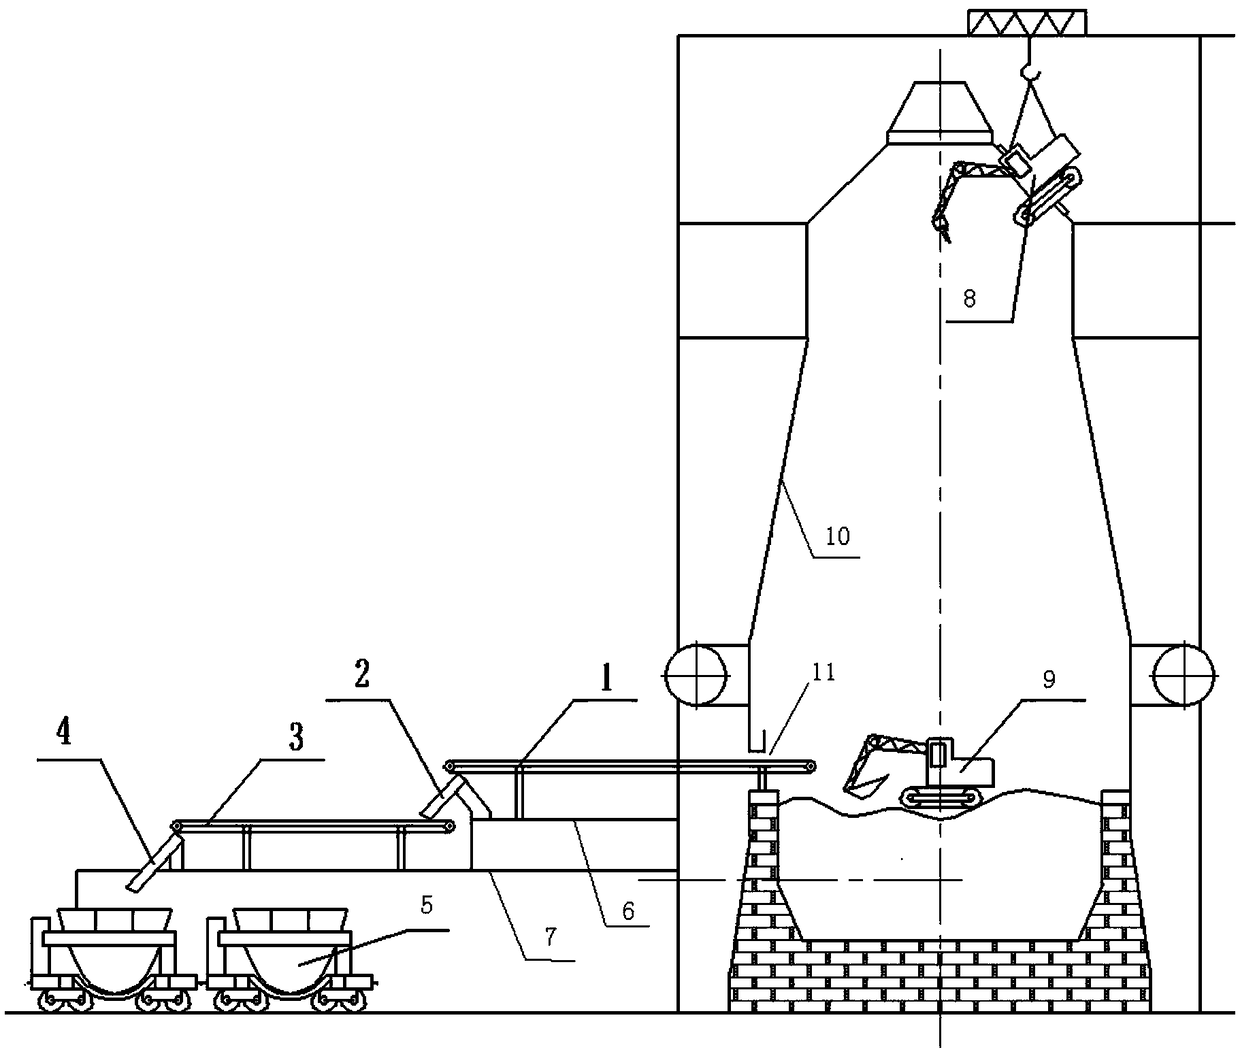 A system and method for cleaning in-furnace waste materials during major overhaul of a large blast furnace